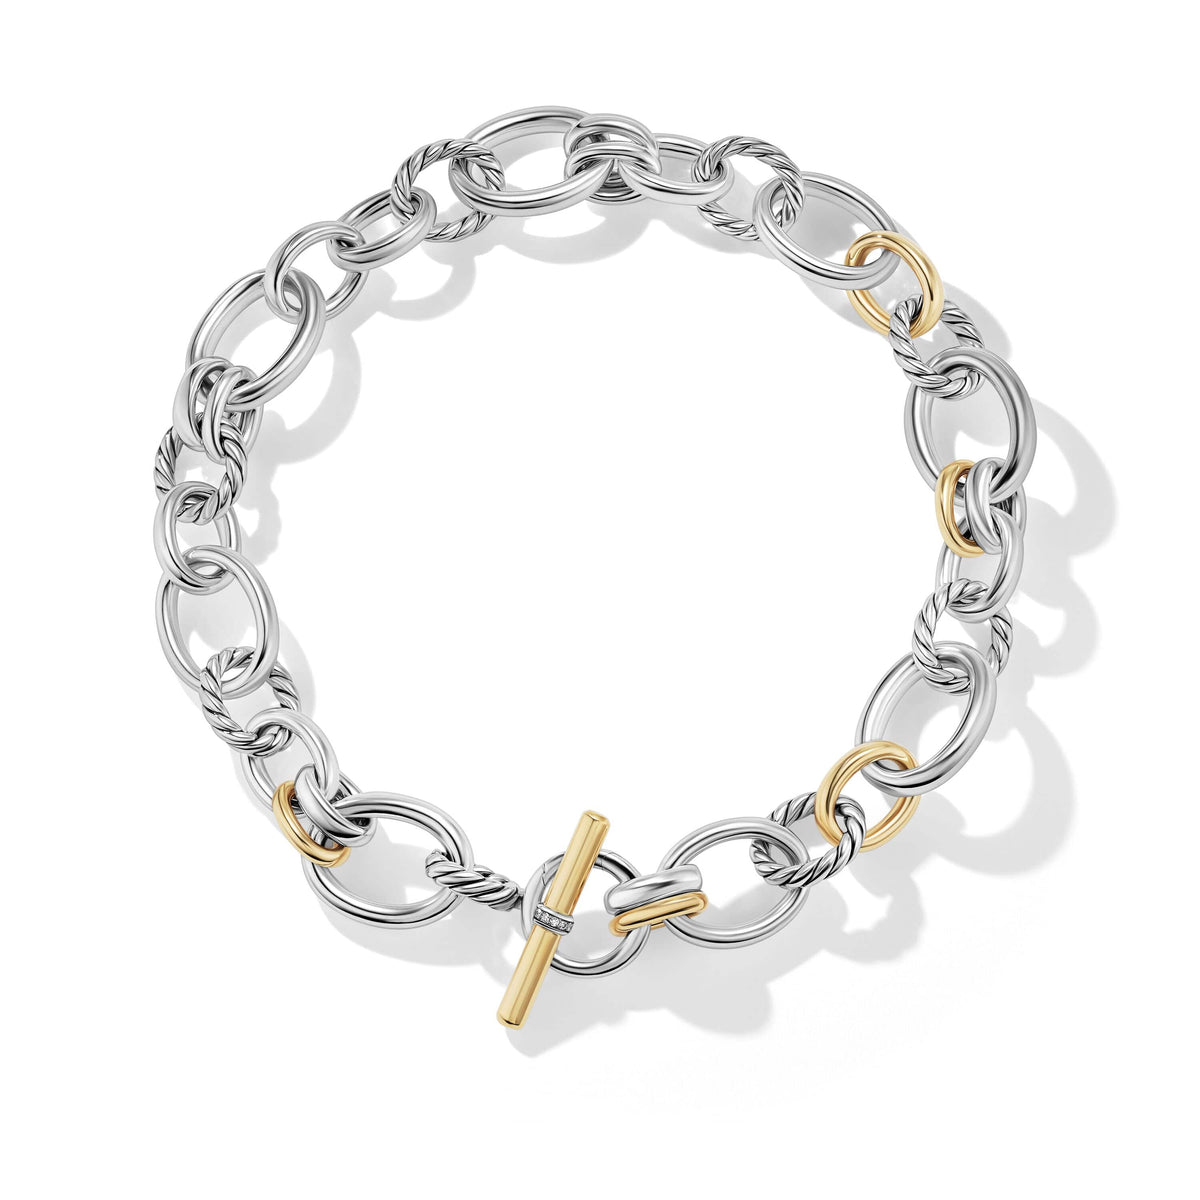 DY Mercer™ Necklace in Sterling Silver with 18K Yellow Gold and Pavé Diamonds